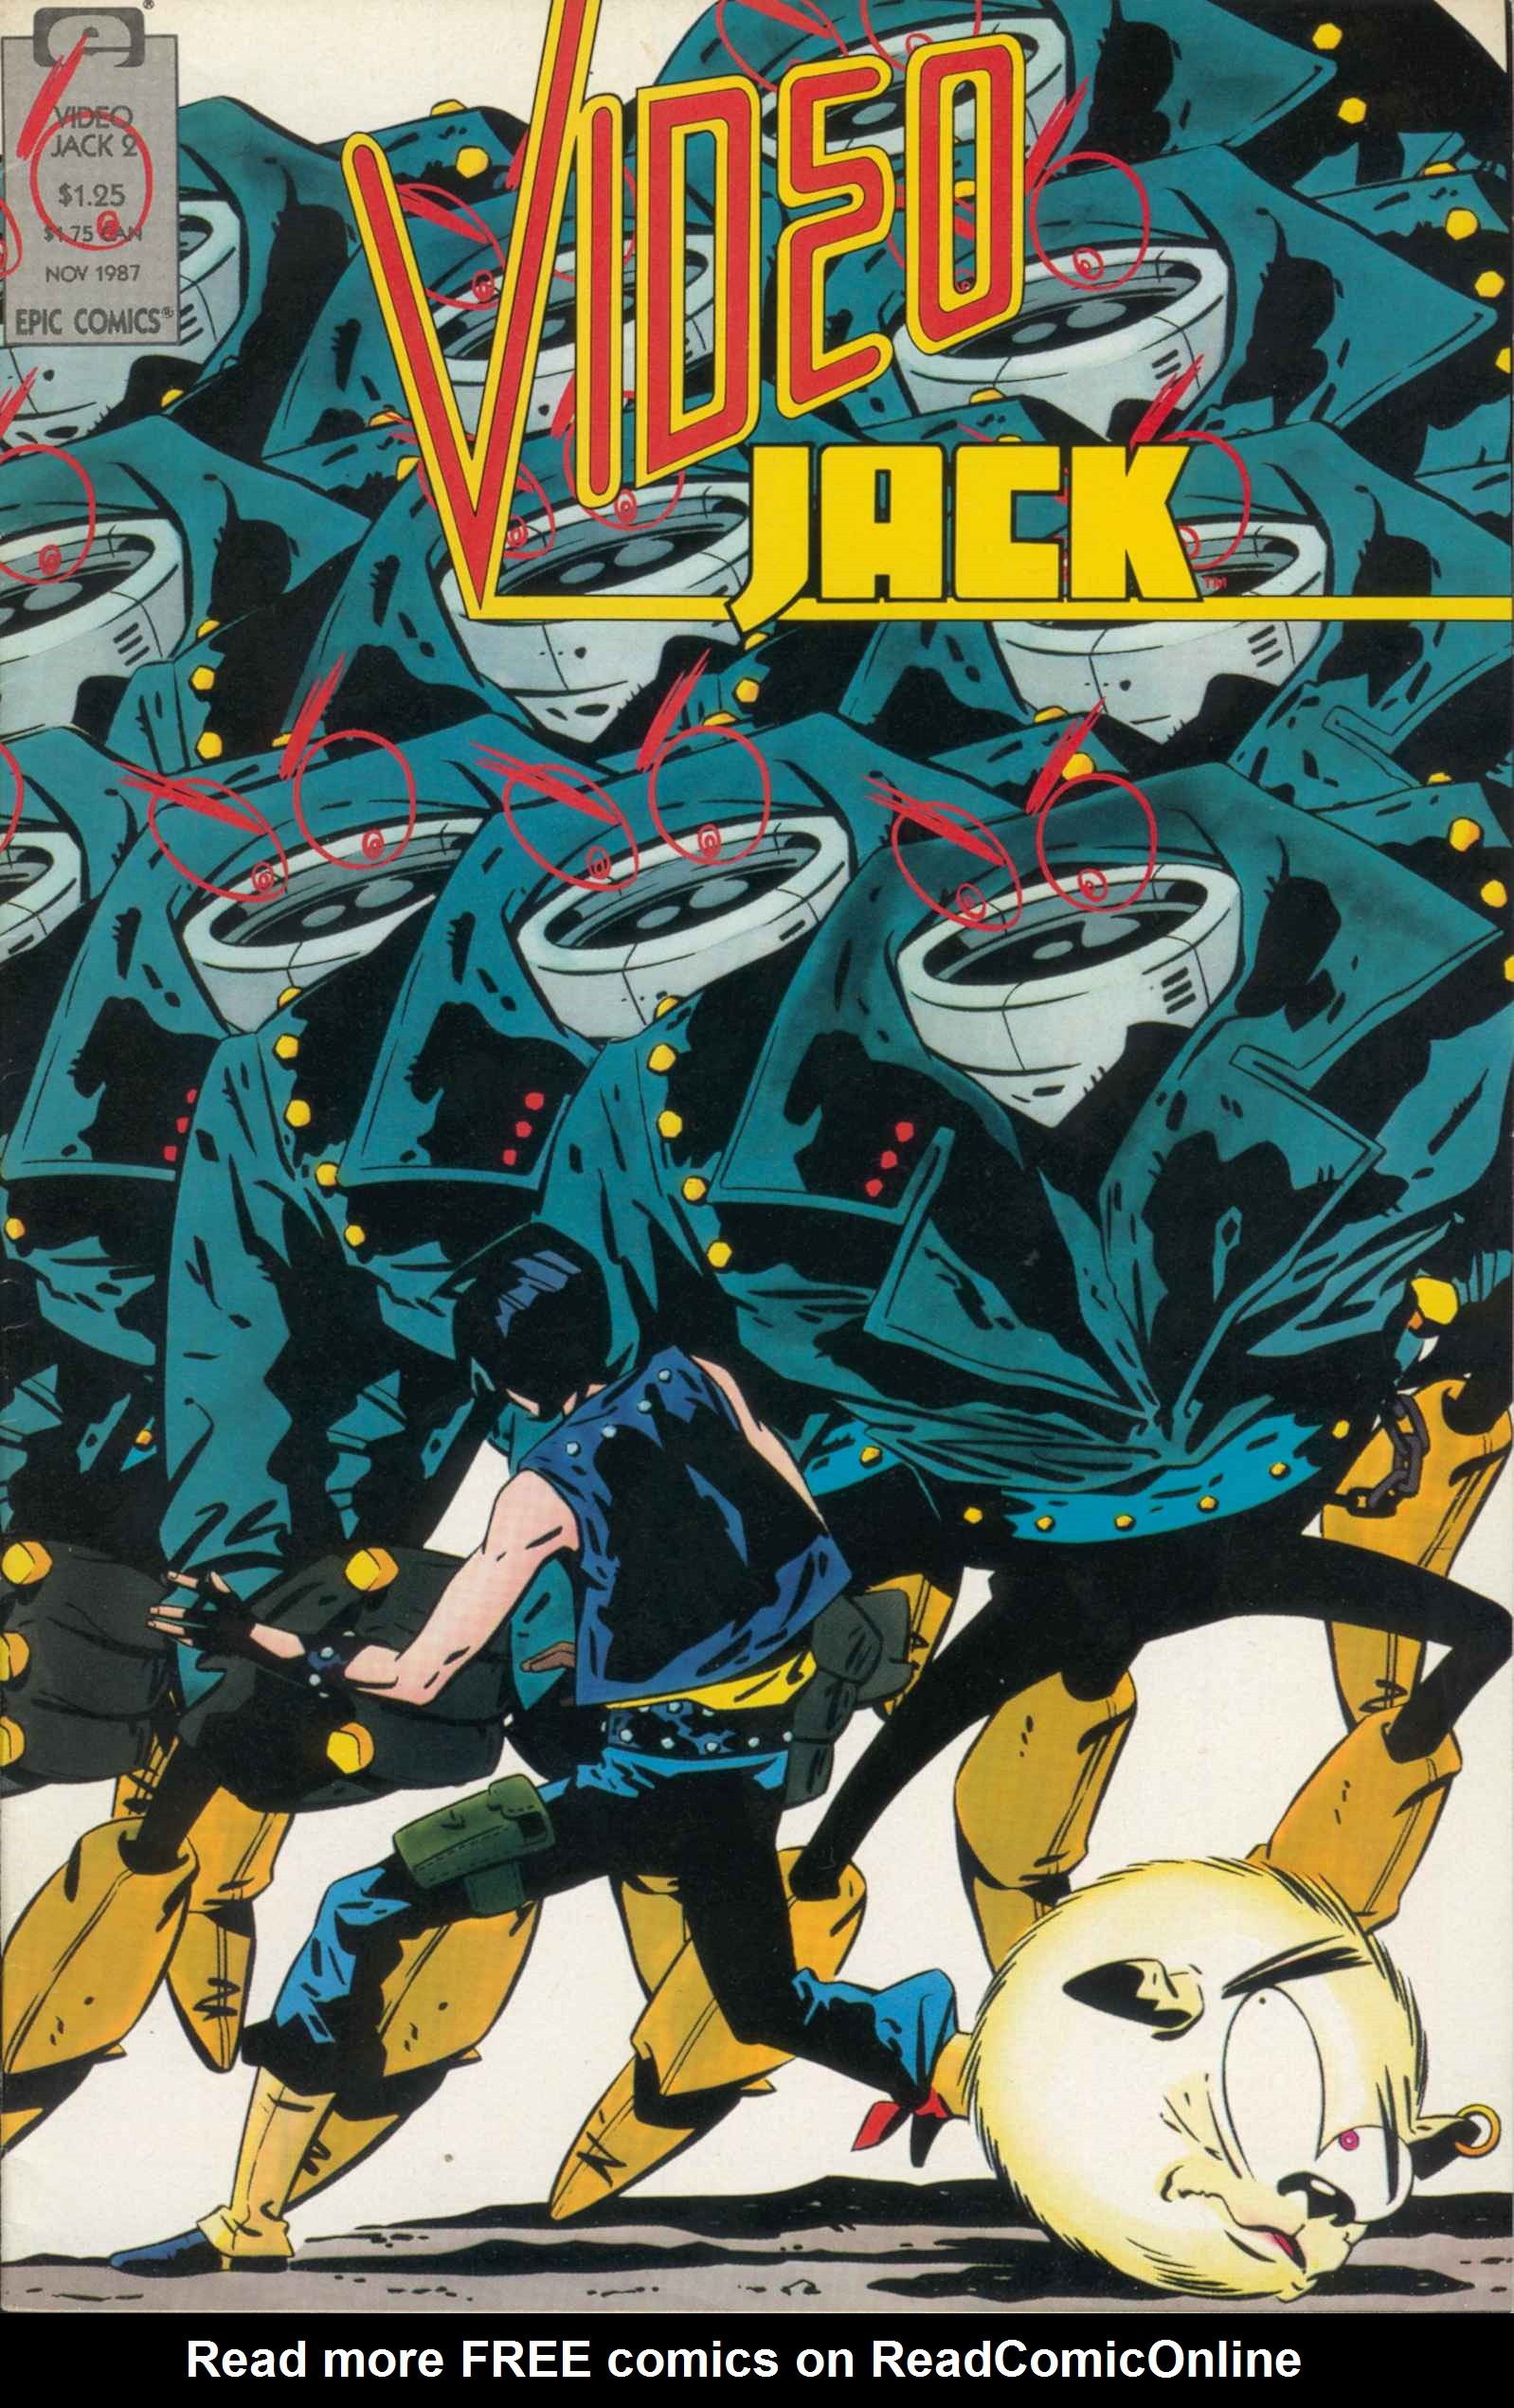 Read online Video Jack comic -  Issue #2 - 1